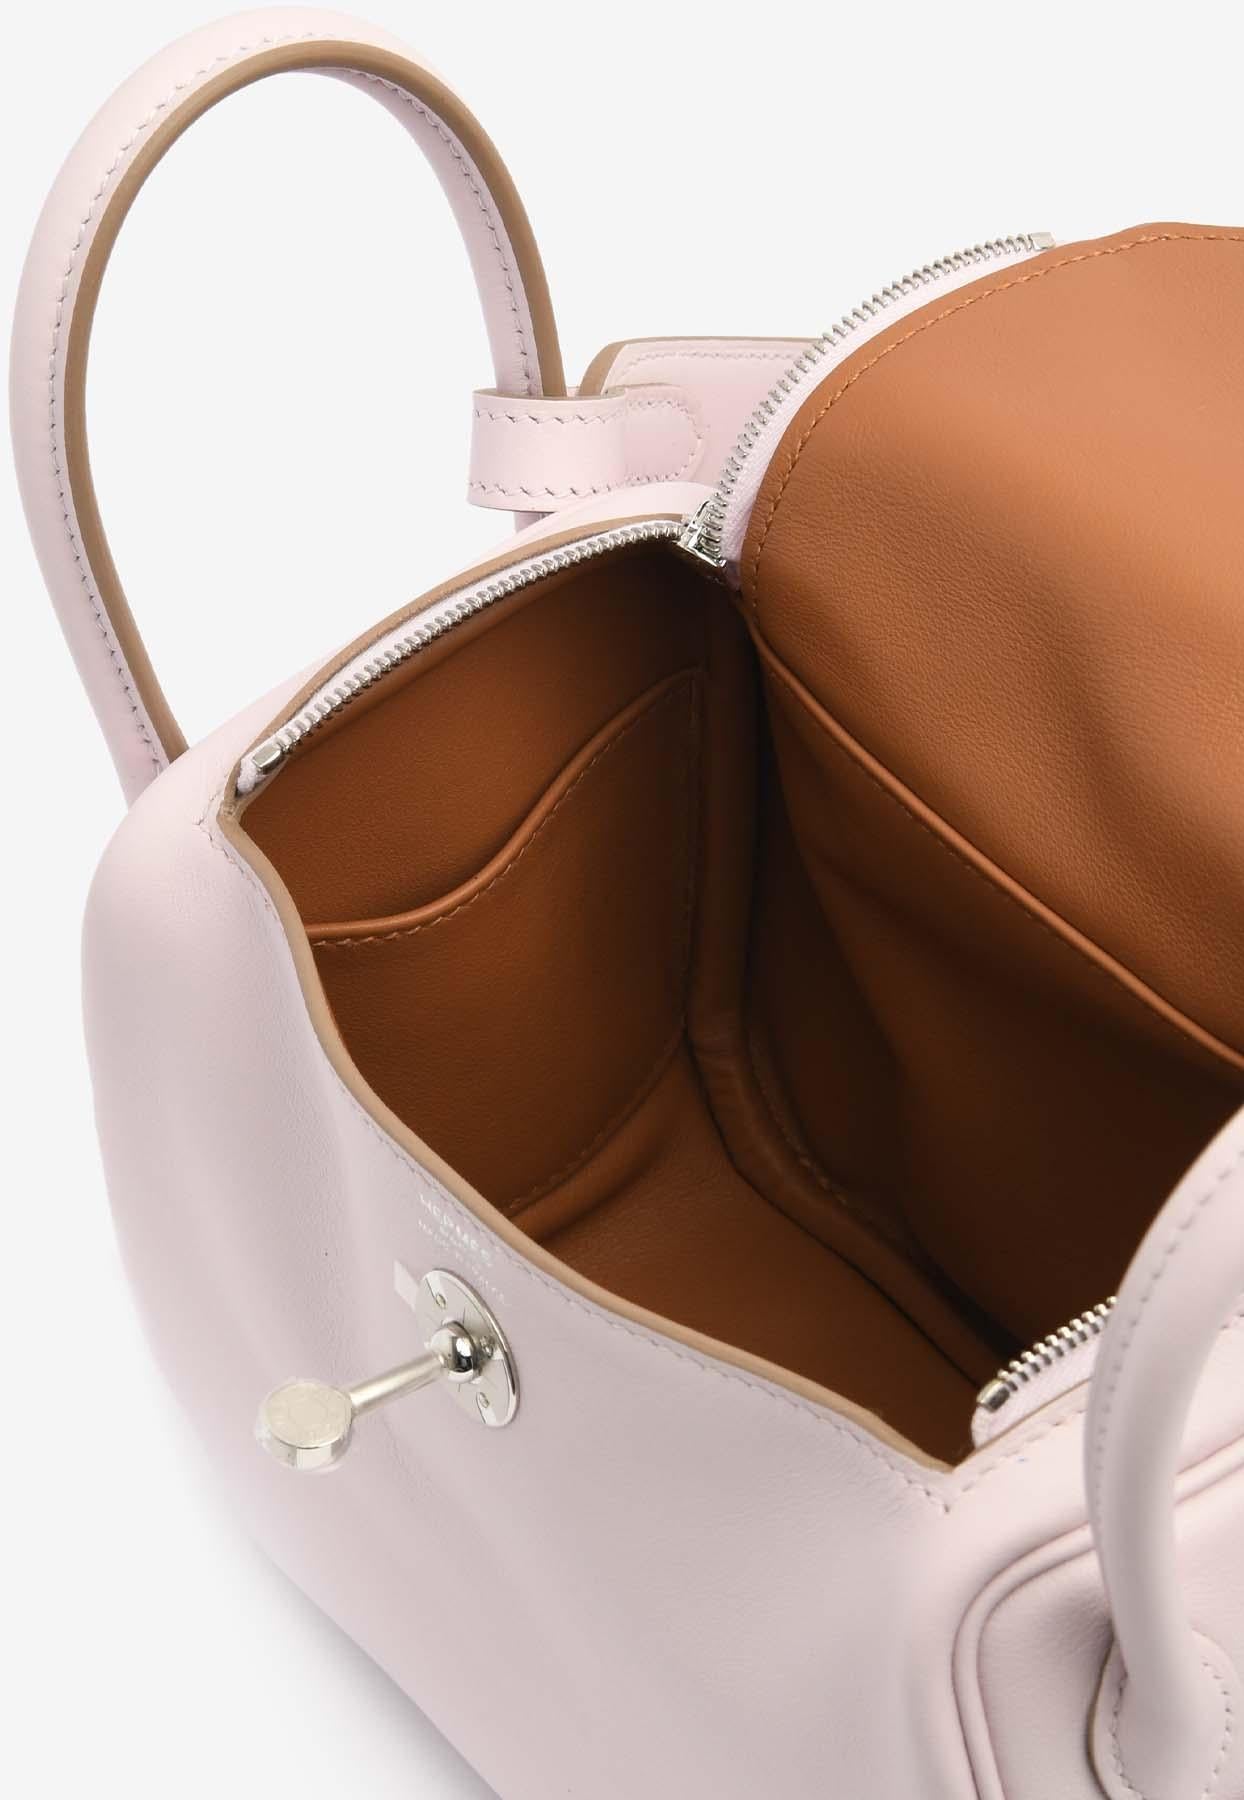 Mini Lindy 20 Verso in Mauve Pale and Gold Swift Leather in Palladium Hardware For Sale 2